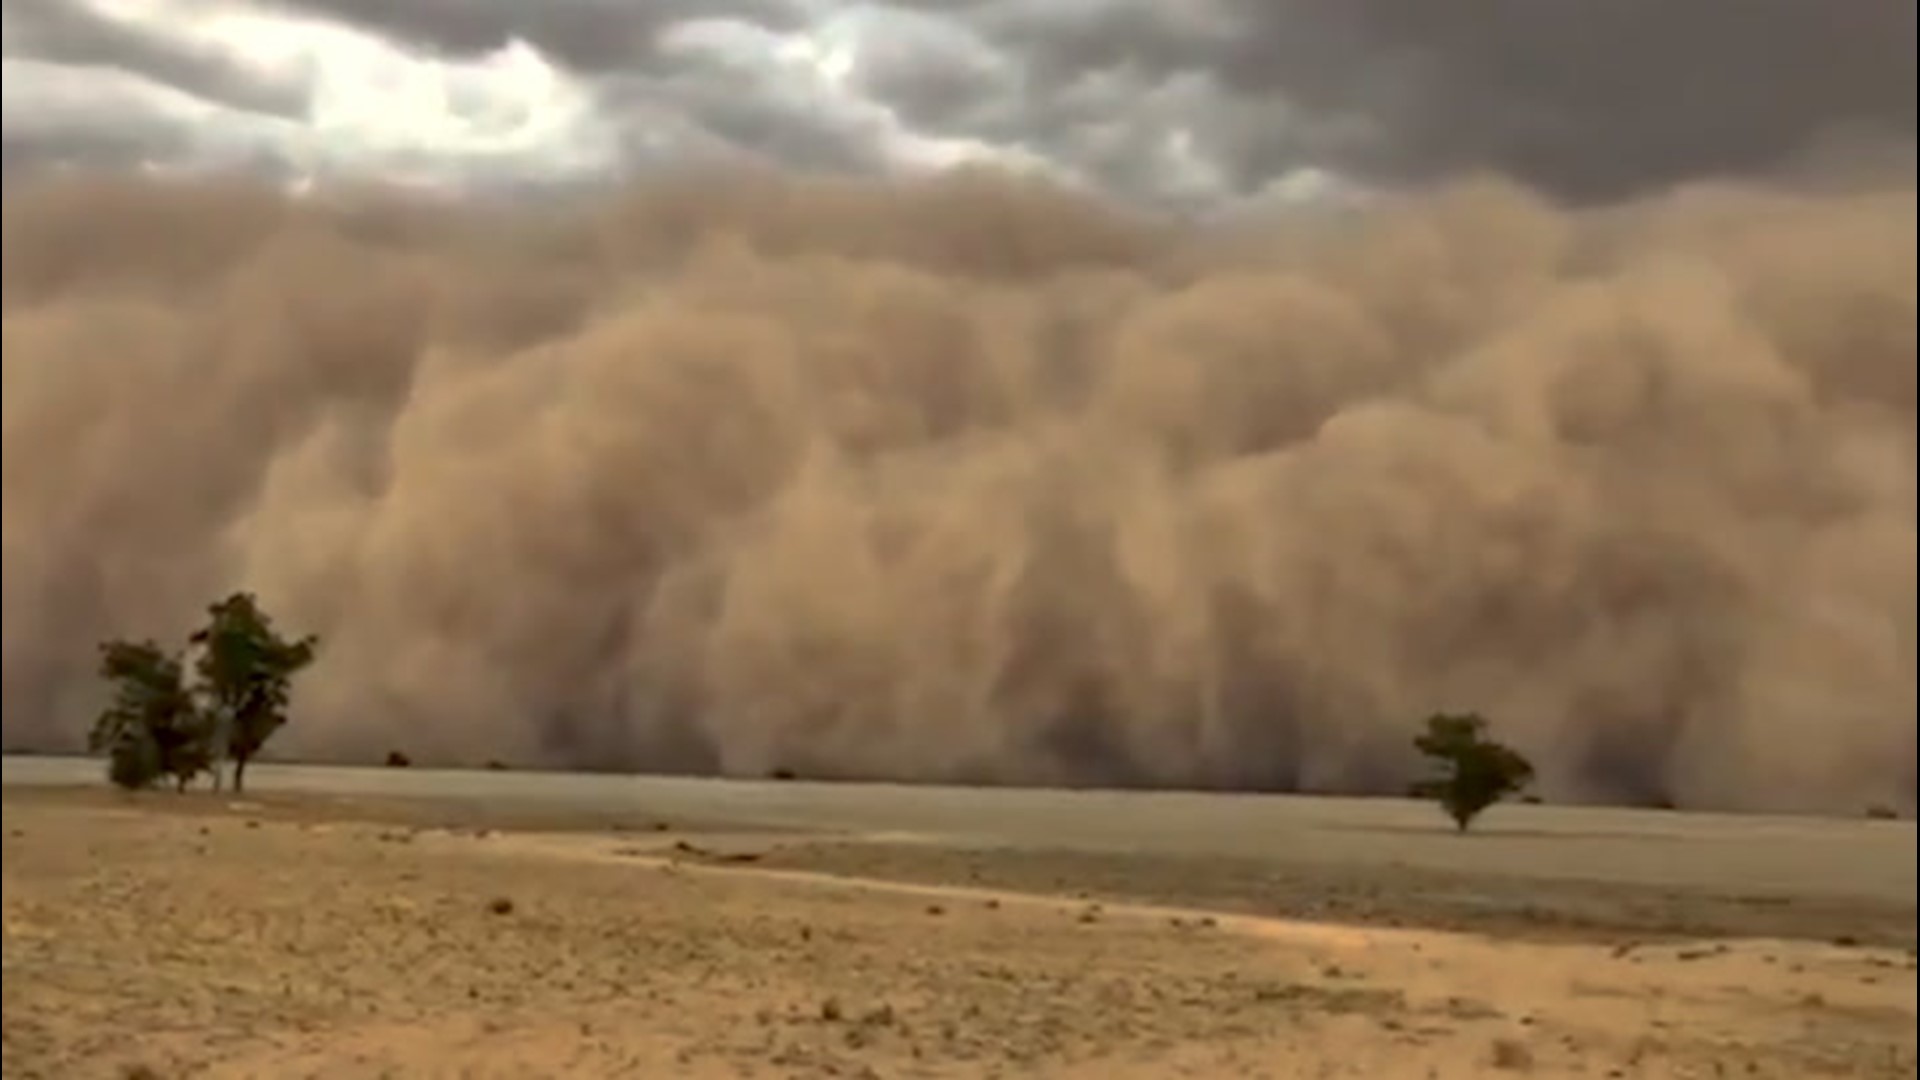 A massive dust storm could be seen on Jan. 19, as it pushed its way toward homes in Dubbo, New South Wales.